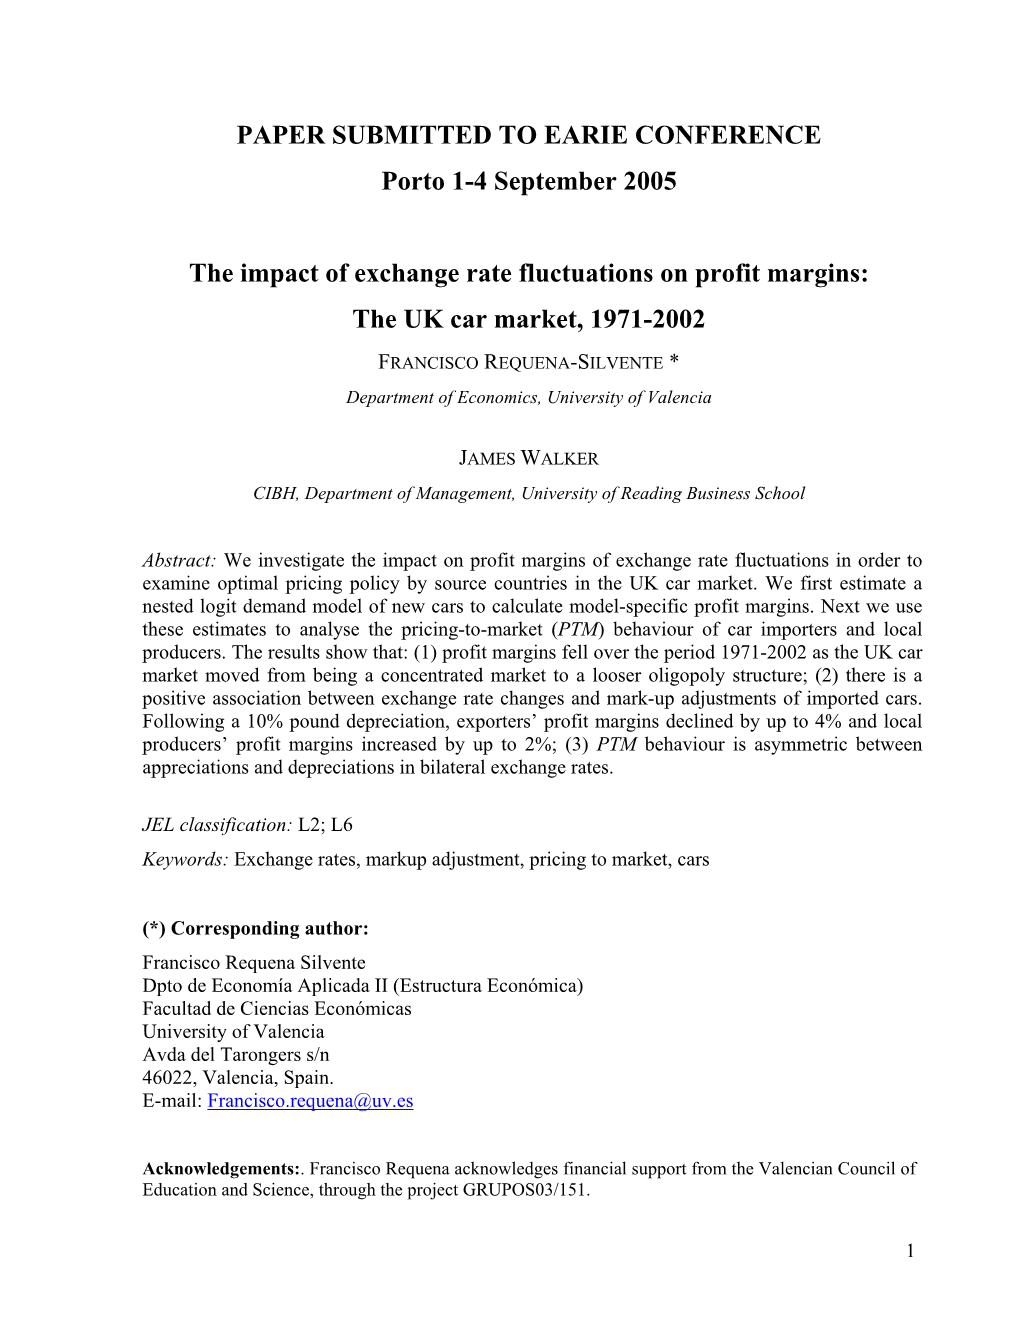 The Impact of Exchange Rate Fluctuations on Profit Margins: the UK Car Market, 1971-2002